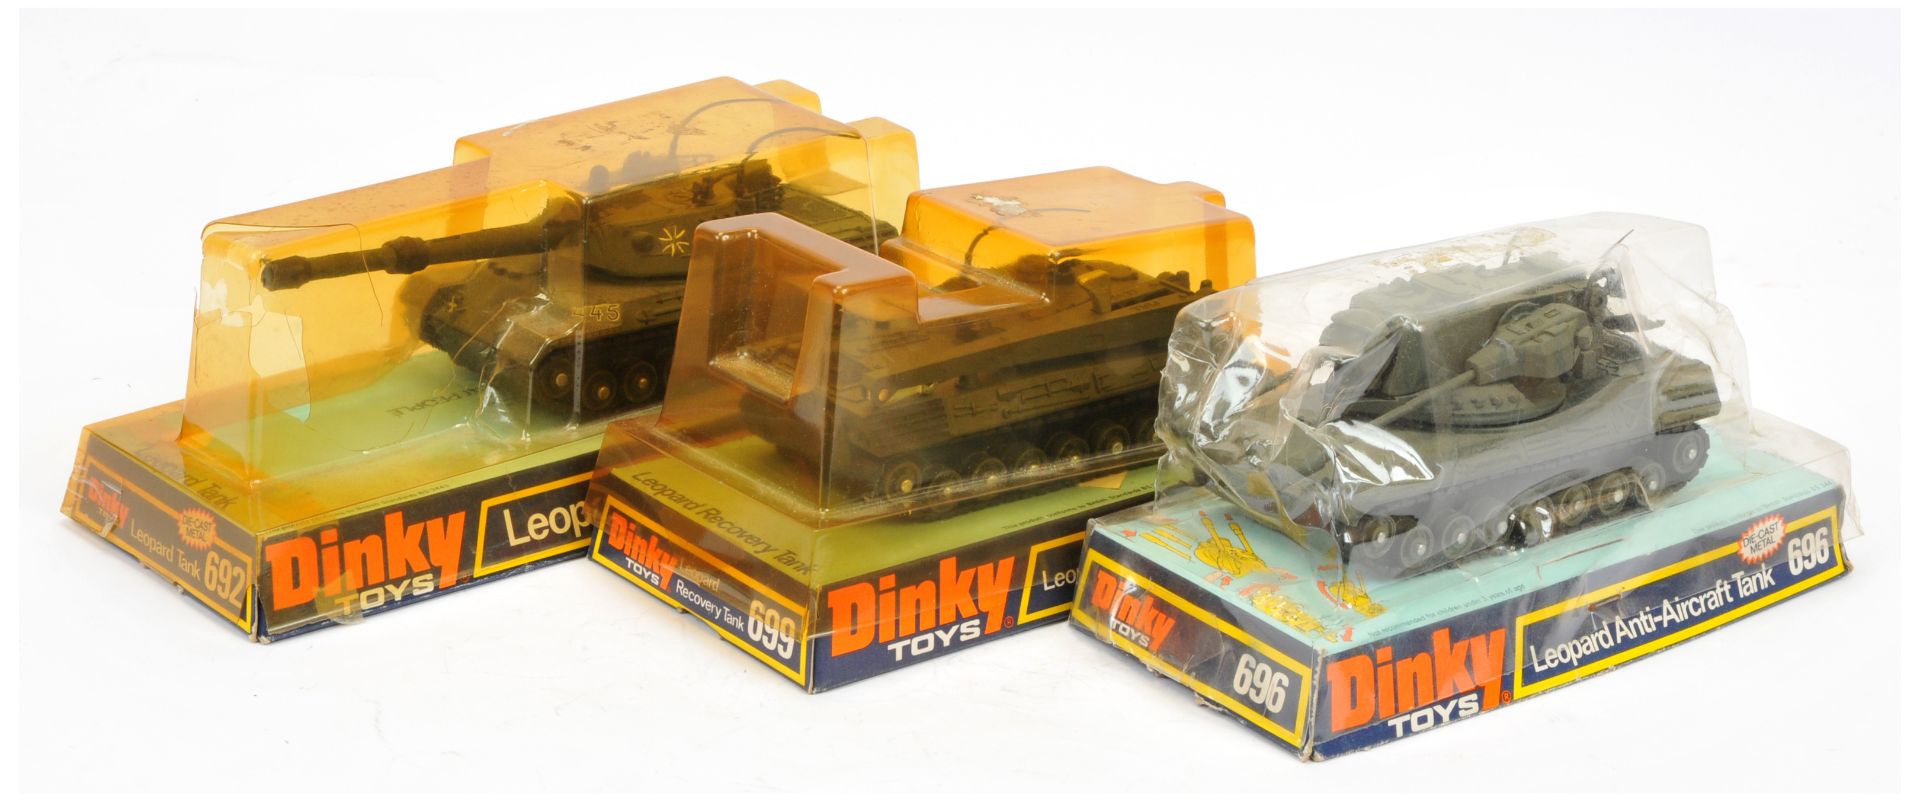 Dinky military group of 3 to include - (1) 692 leopard tank, missiles attached to sprue